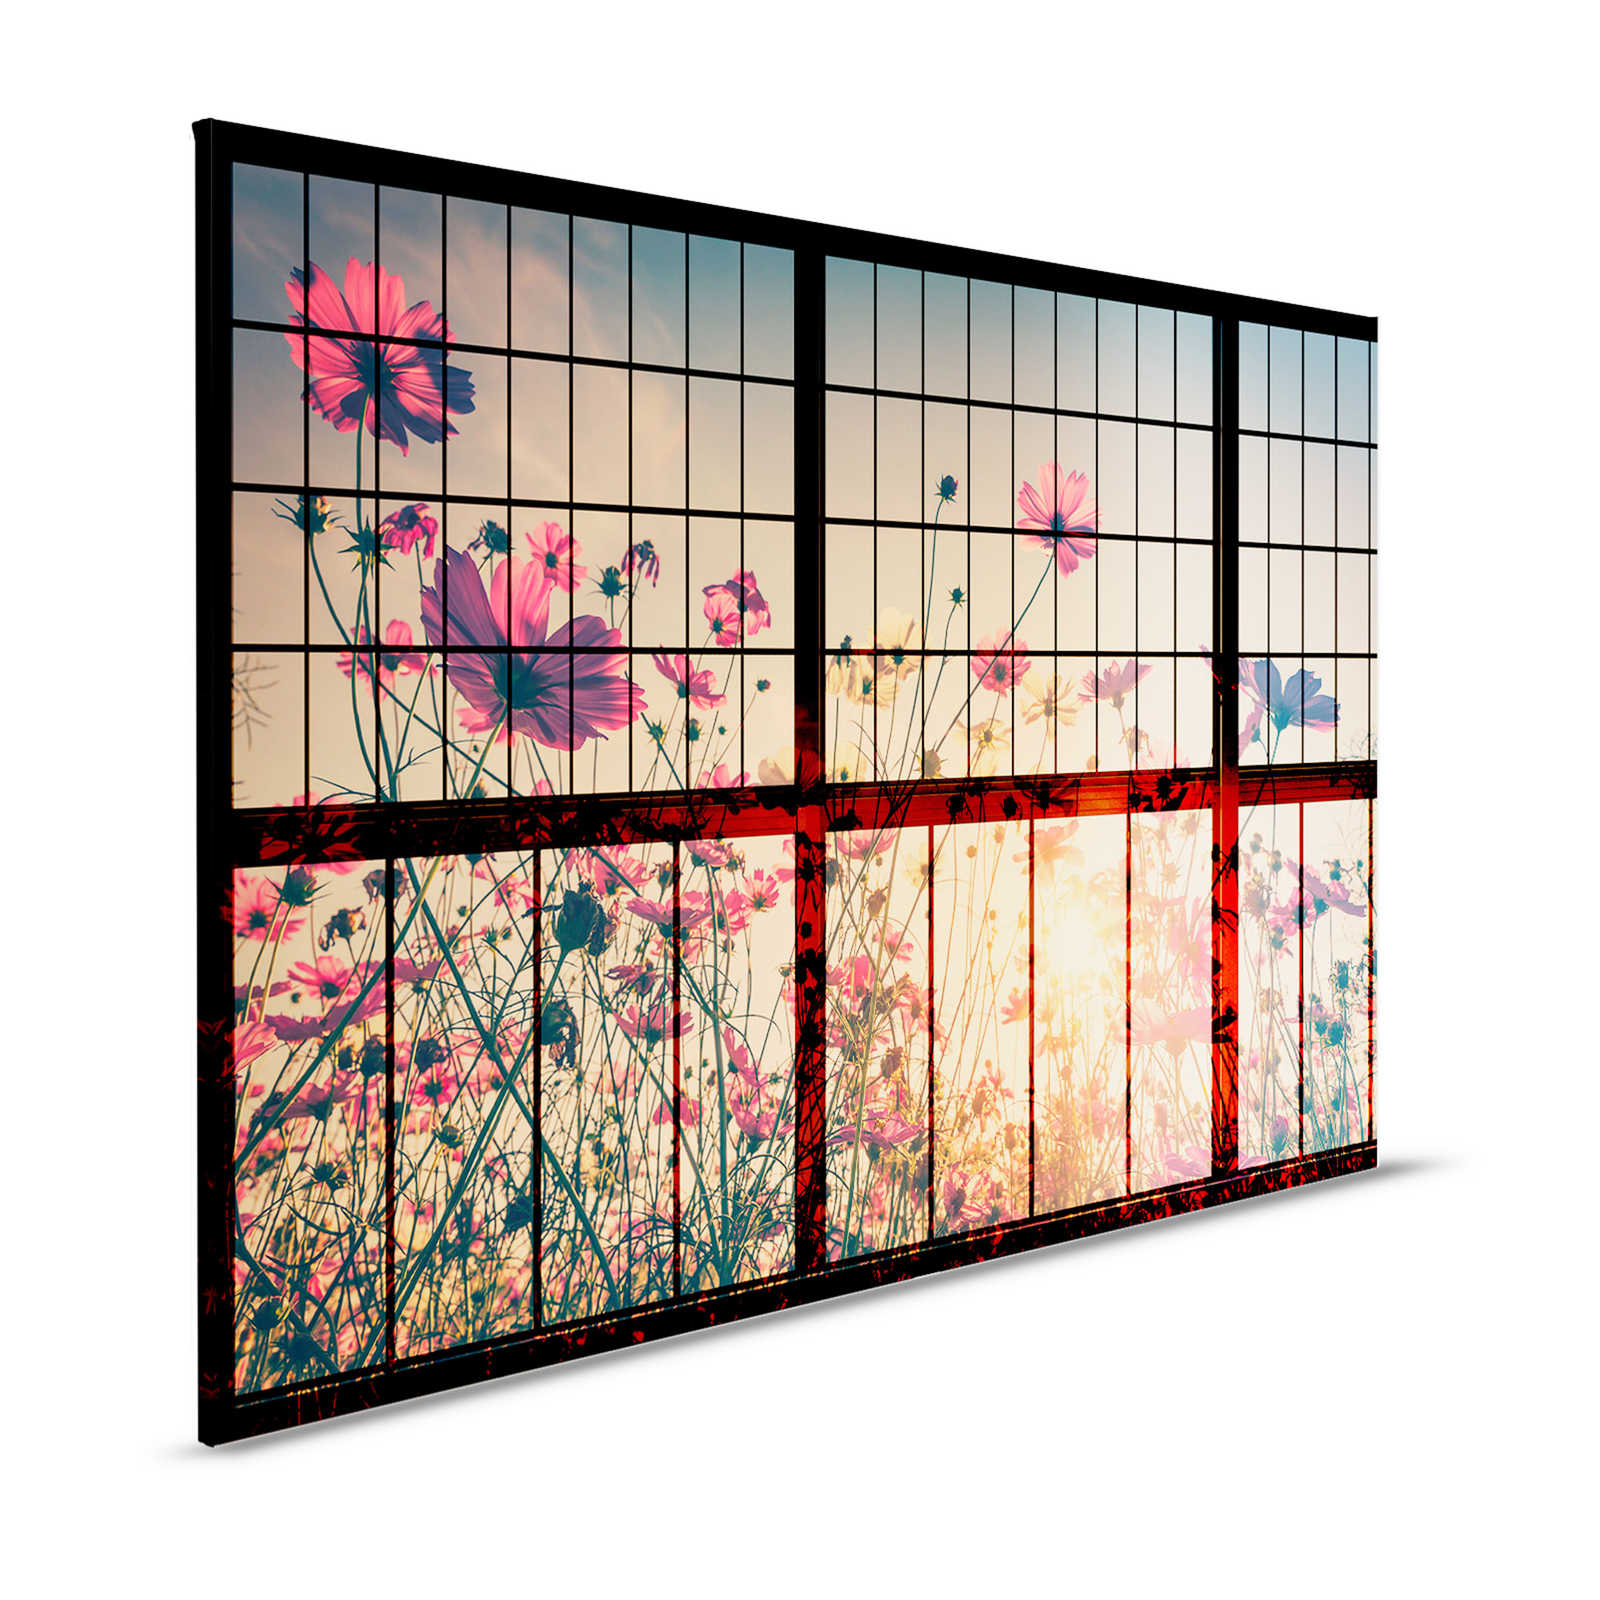 Meadow 1 - Muntin Window Canvas Painting with Flower Meadow - 1.20 m x 0.80 m
